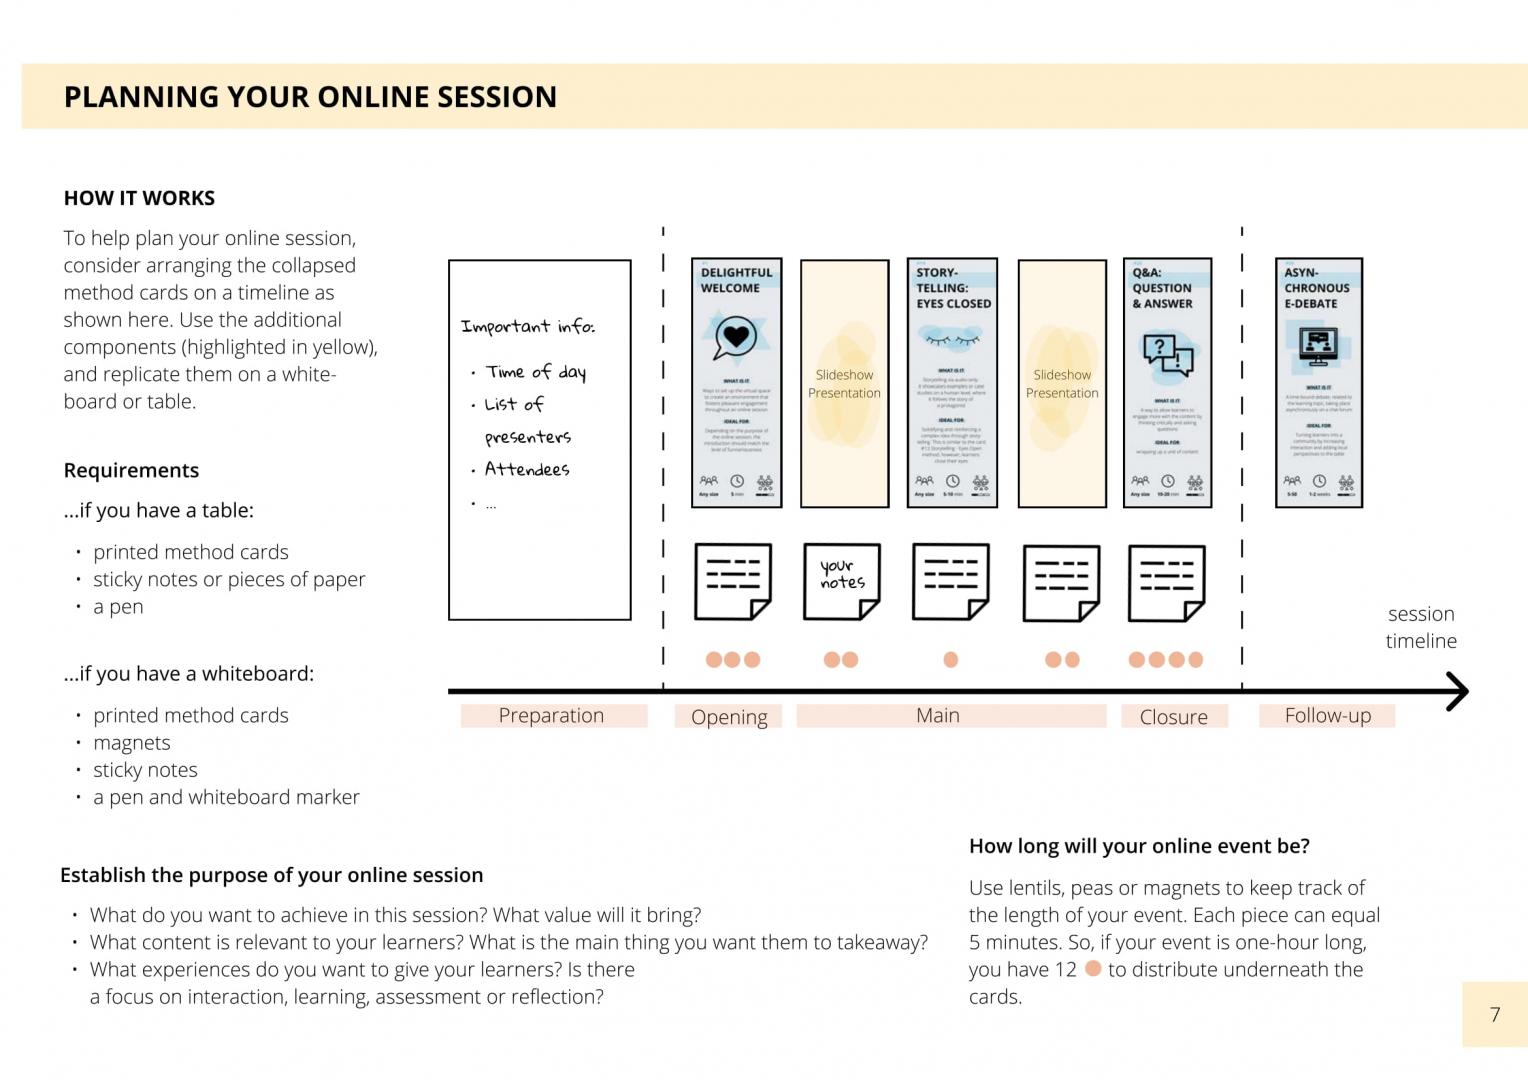 PLANNING YOUR ONLINE SESSION